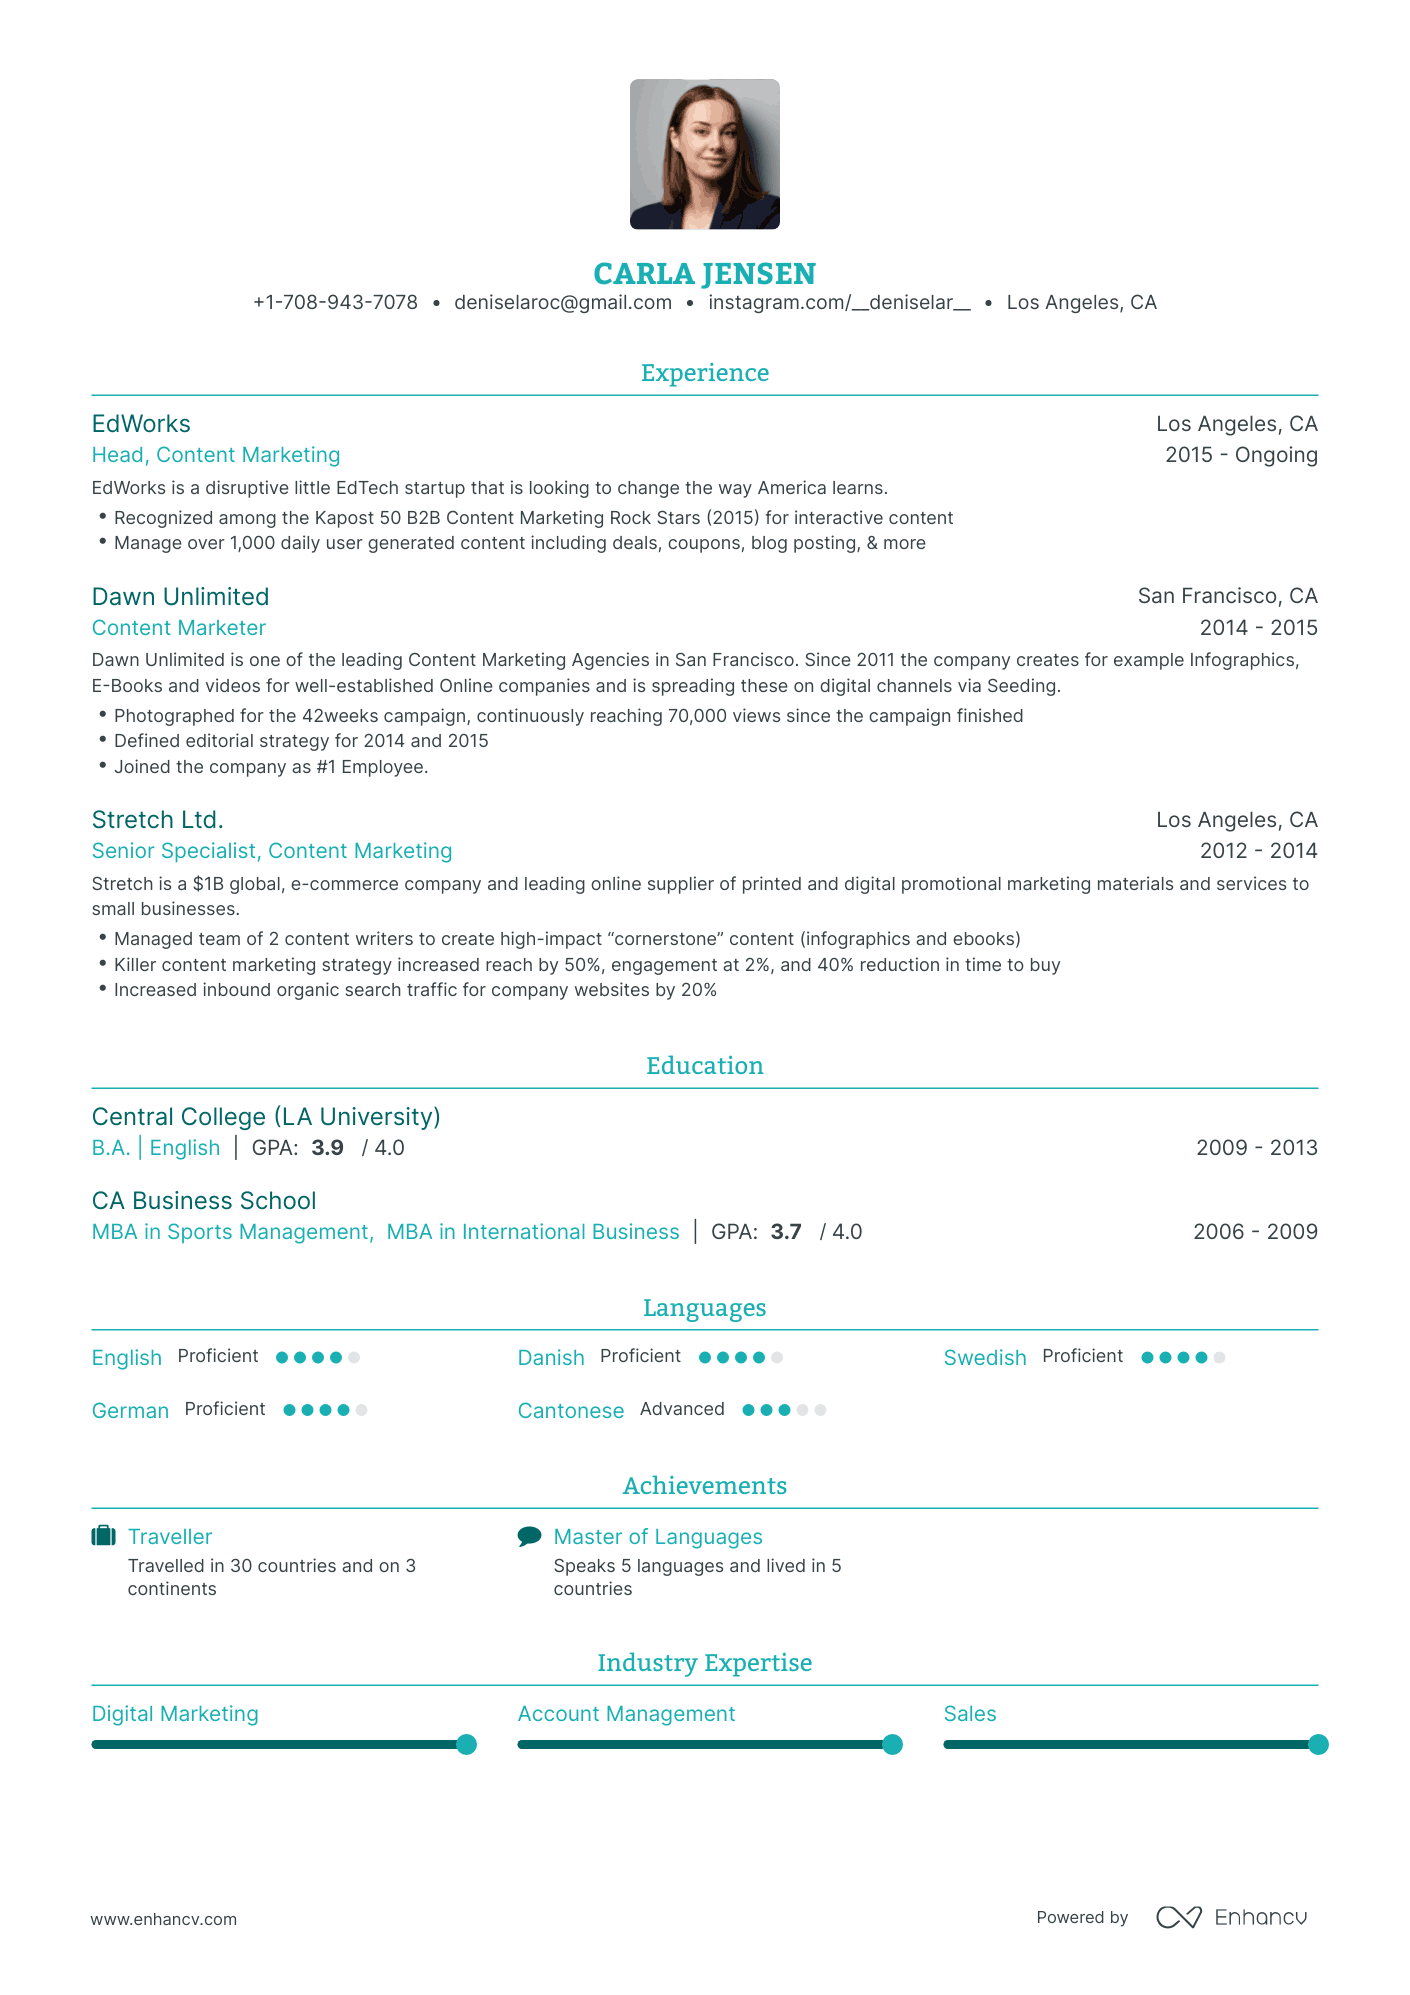 Traditional Content Marketing Resume Template